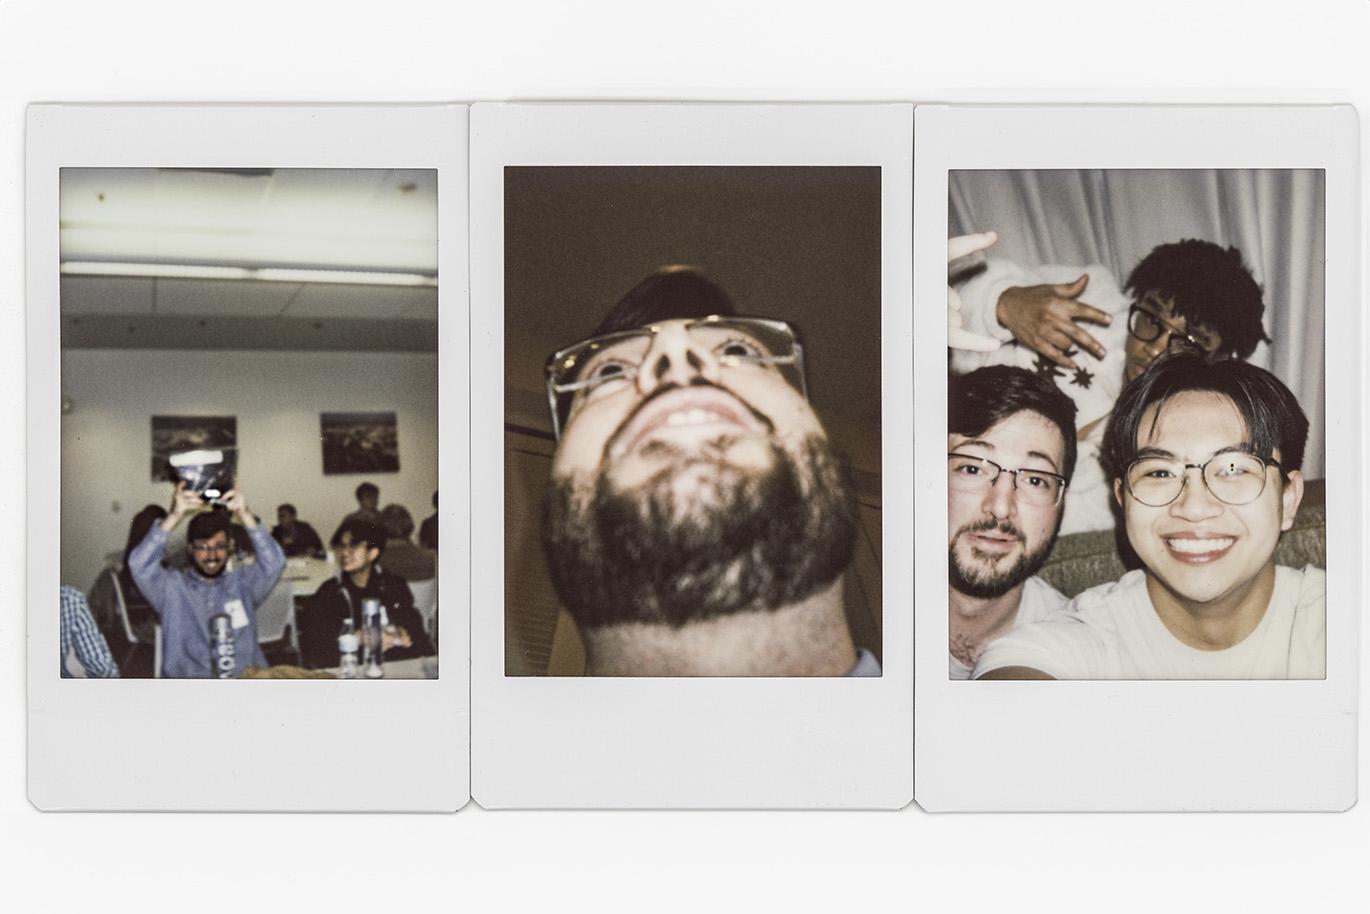 Set of three scanned polaroid photos showing college students laughing, taking a group selfie and an individual selfie.